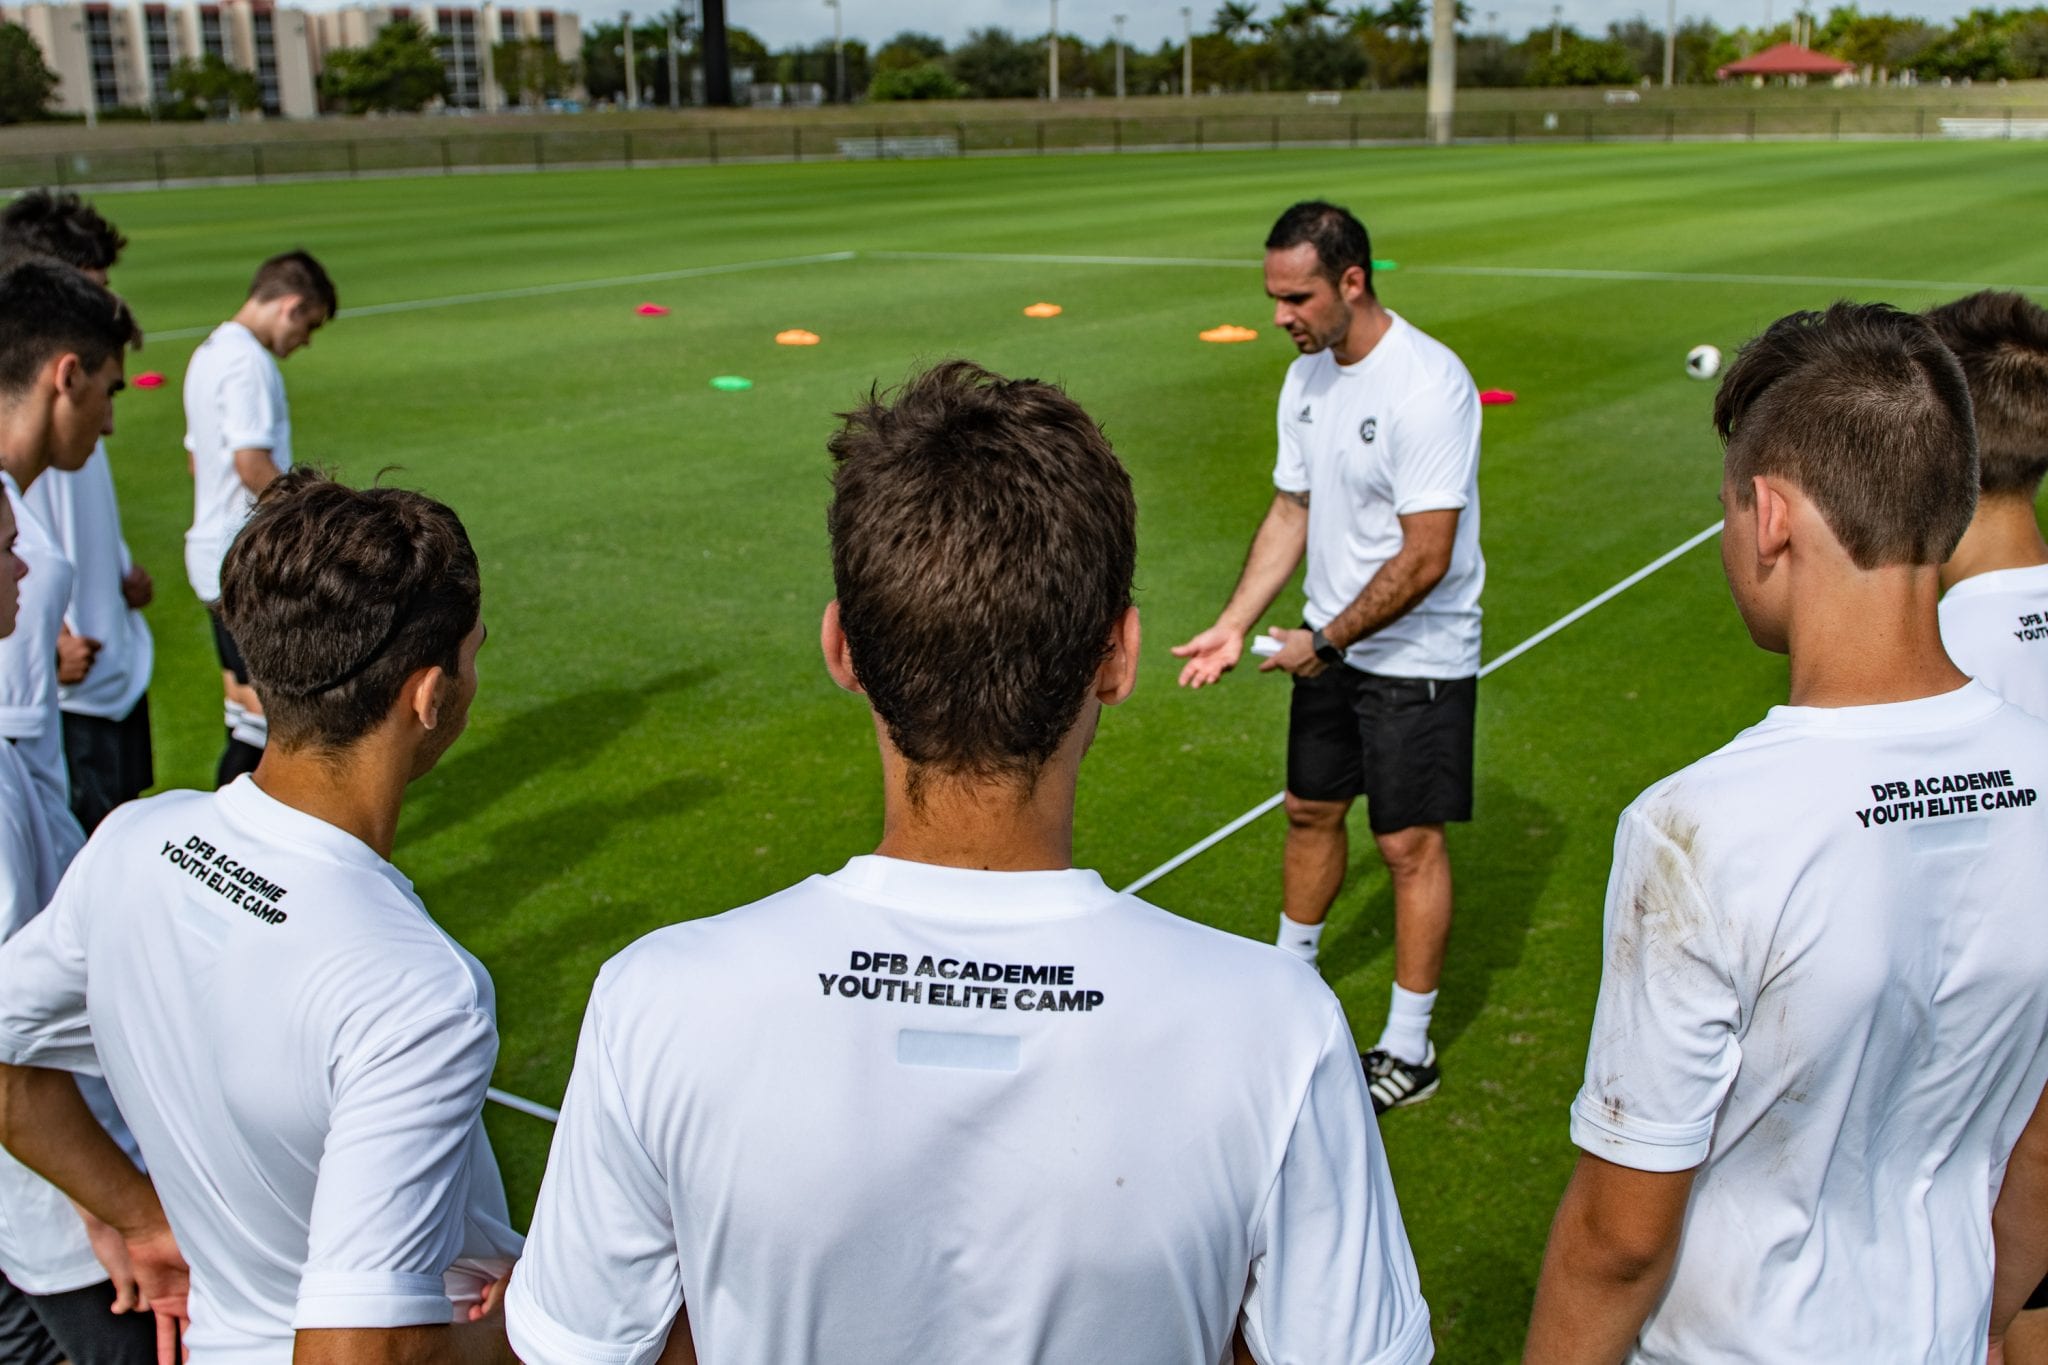 FORT LAUDERDALE, FL - DECEMBER 28: German professional Coach Alexander Nouri and athletes in action during the DFB Elite Youth Soccer Camp at Central Broward Stadium on December 28, 2018 in Fort Lauderdale, Florida. (Photo by Mark Brown/Getty Images) *** Local Caption *** Alexander Nouri